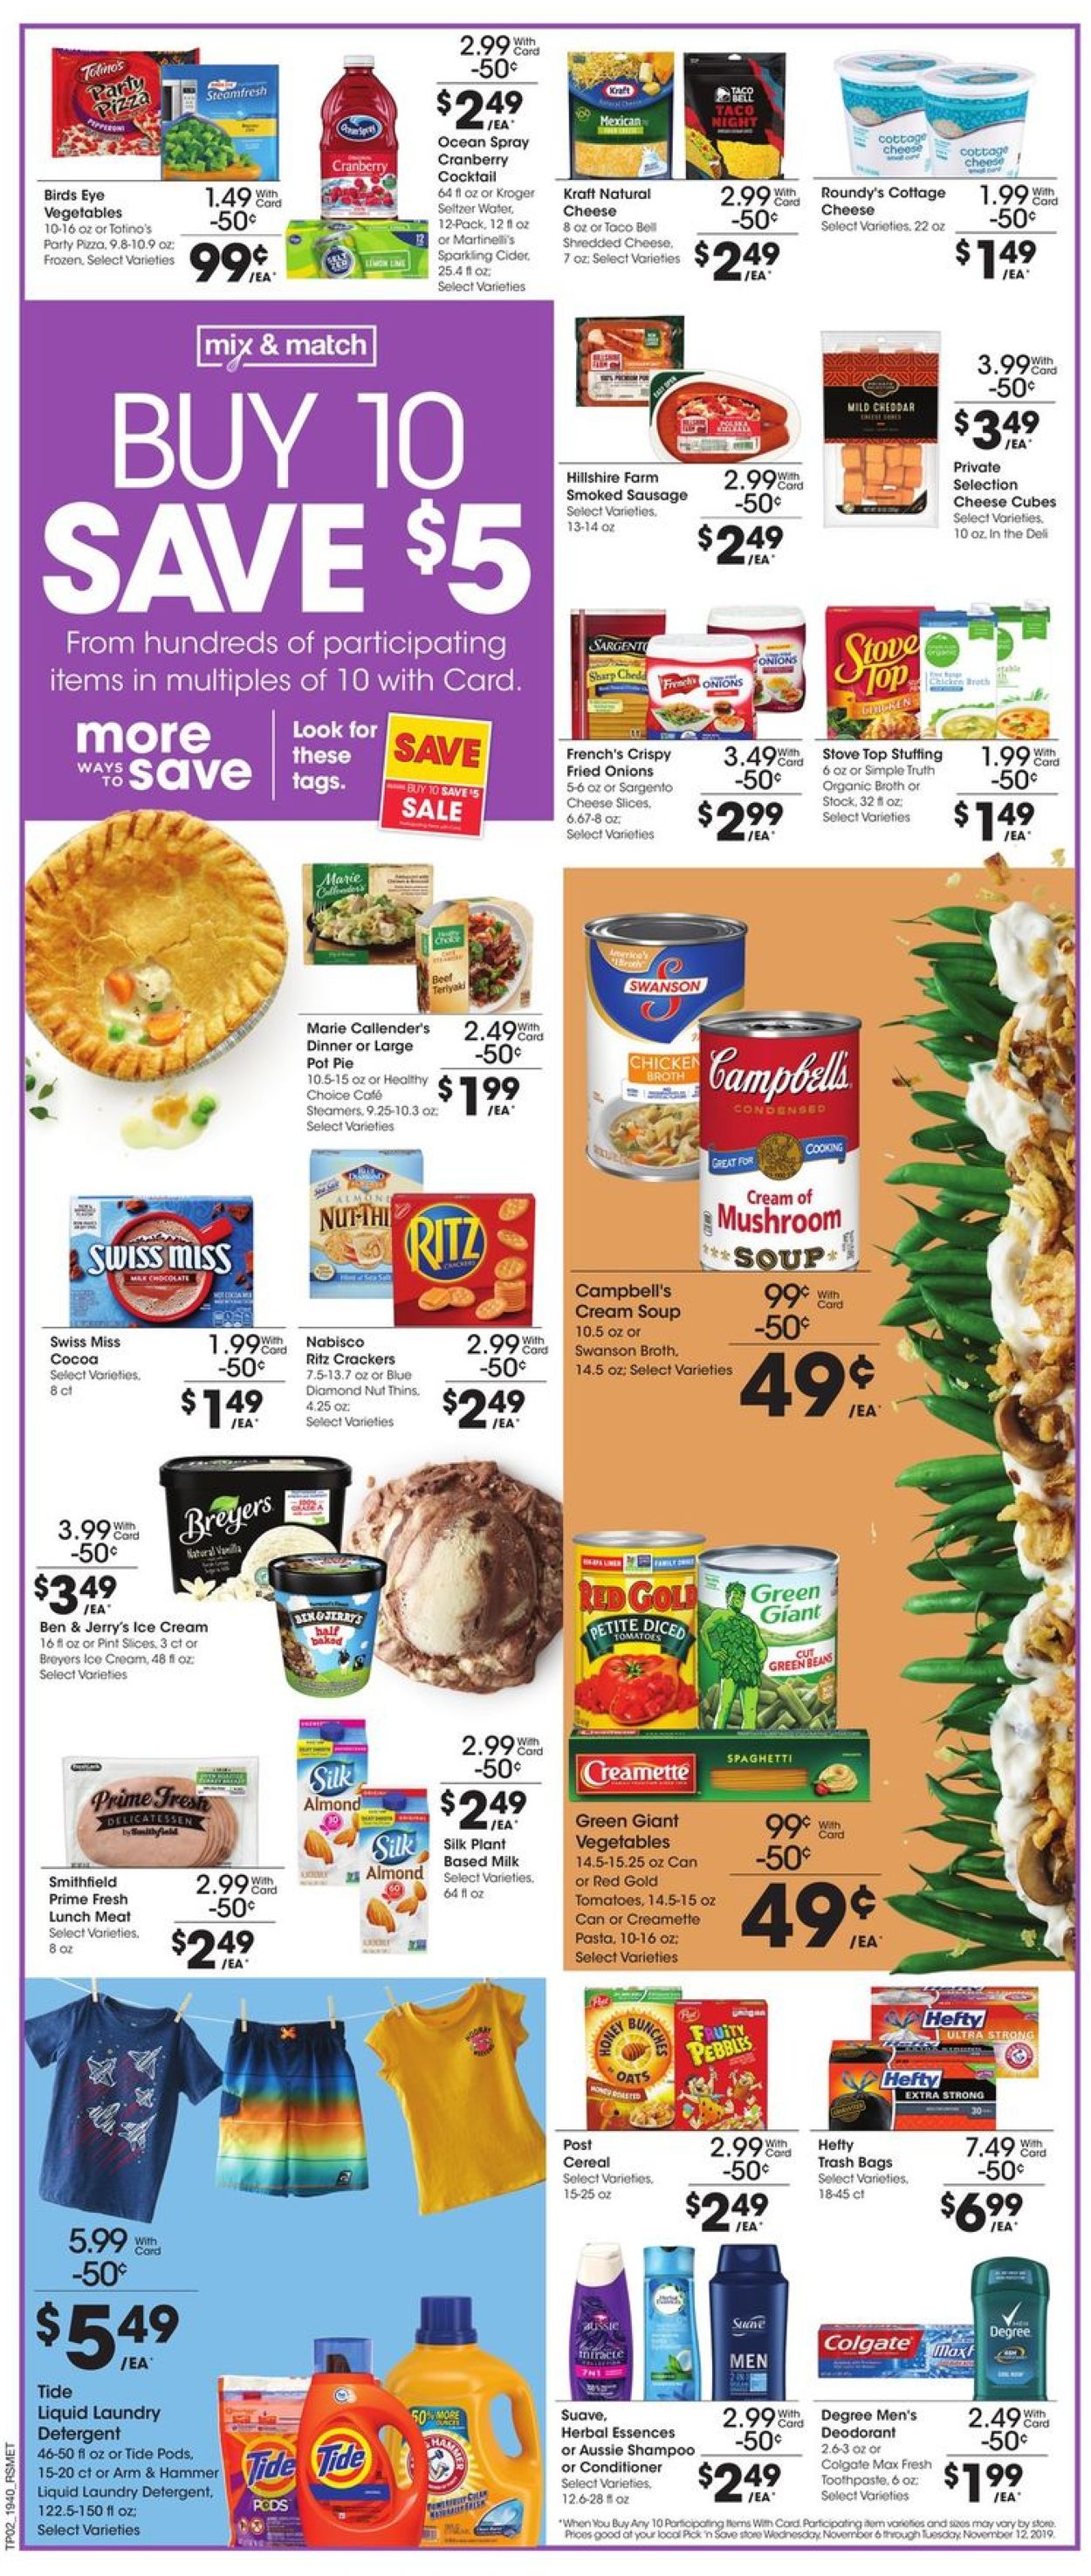 Pick ‘n Save Ad from 11/06/2019